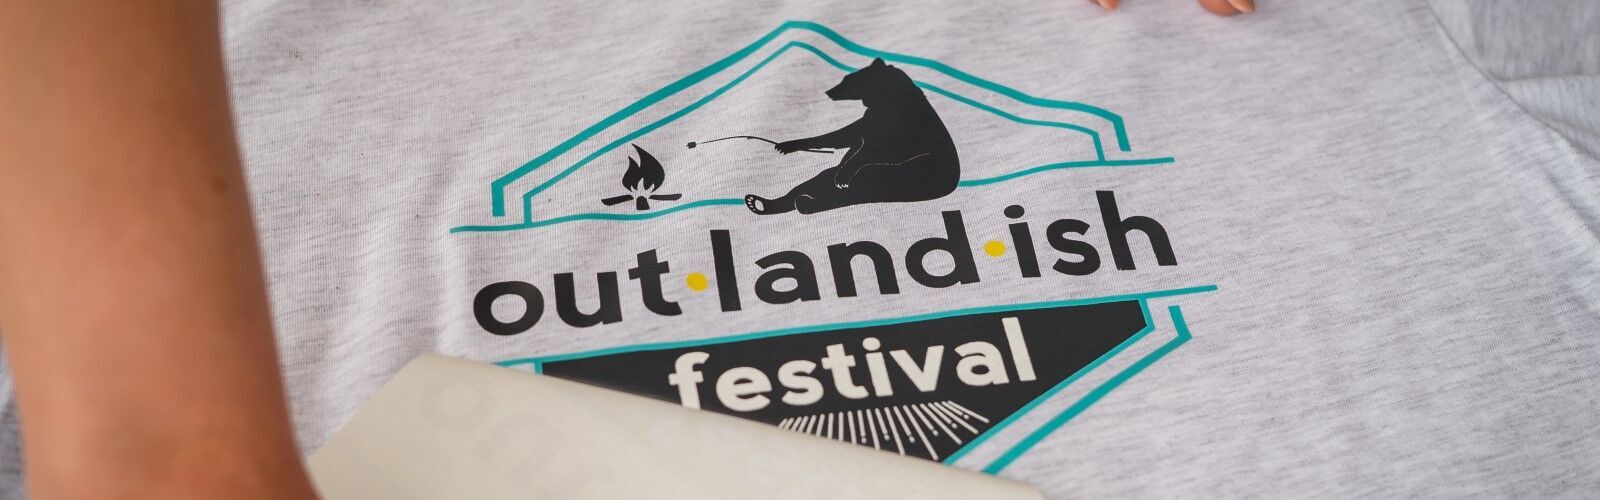 out·land·ish festival t-shirts being printed by Red Threads